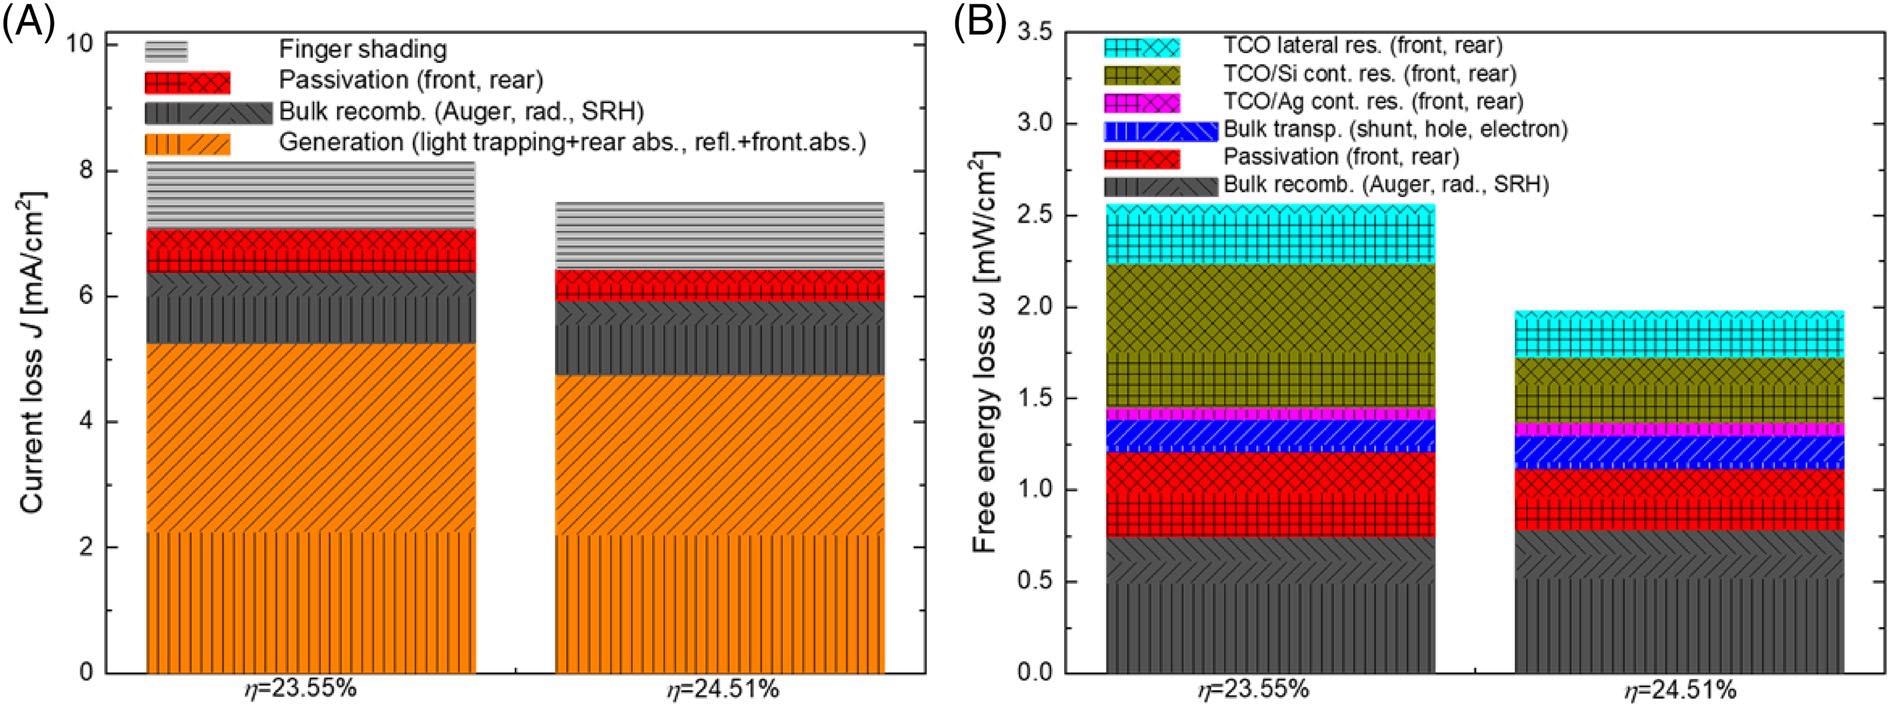 (A) Current and (B) free energy loss analysis for old and newly certified SHJ solar cells based on Quokka3 simulation